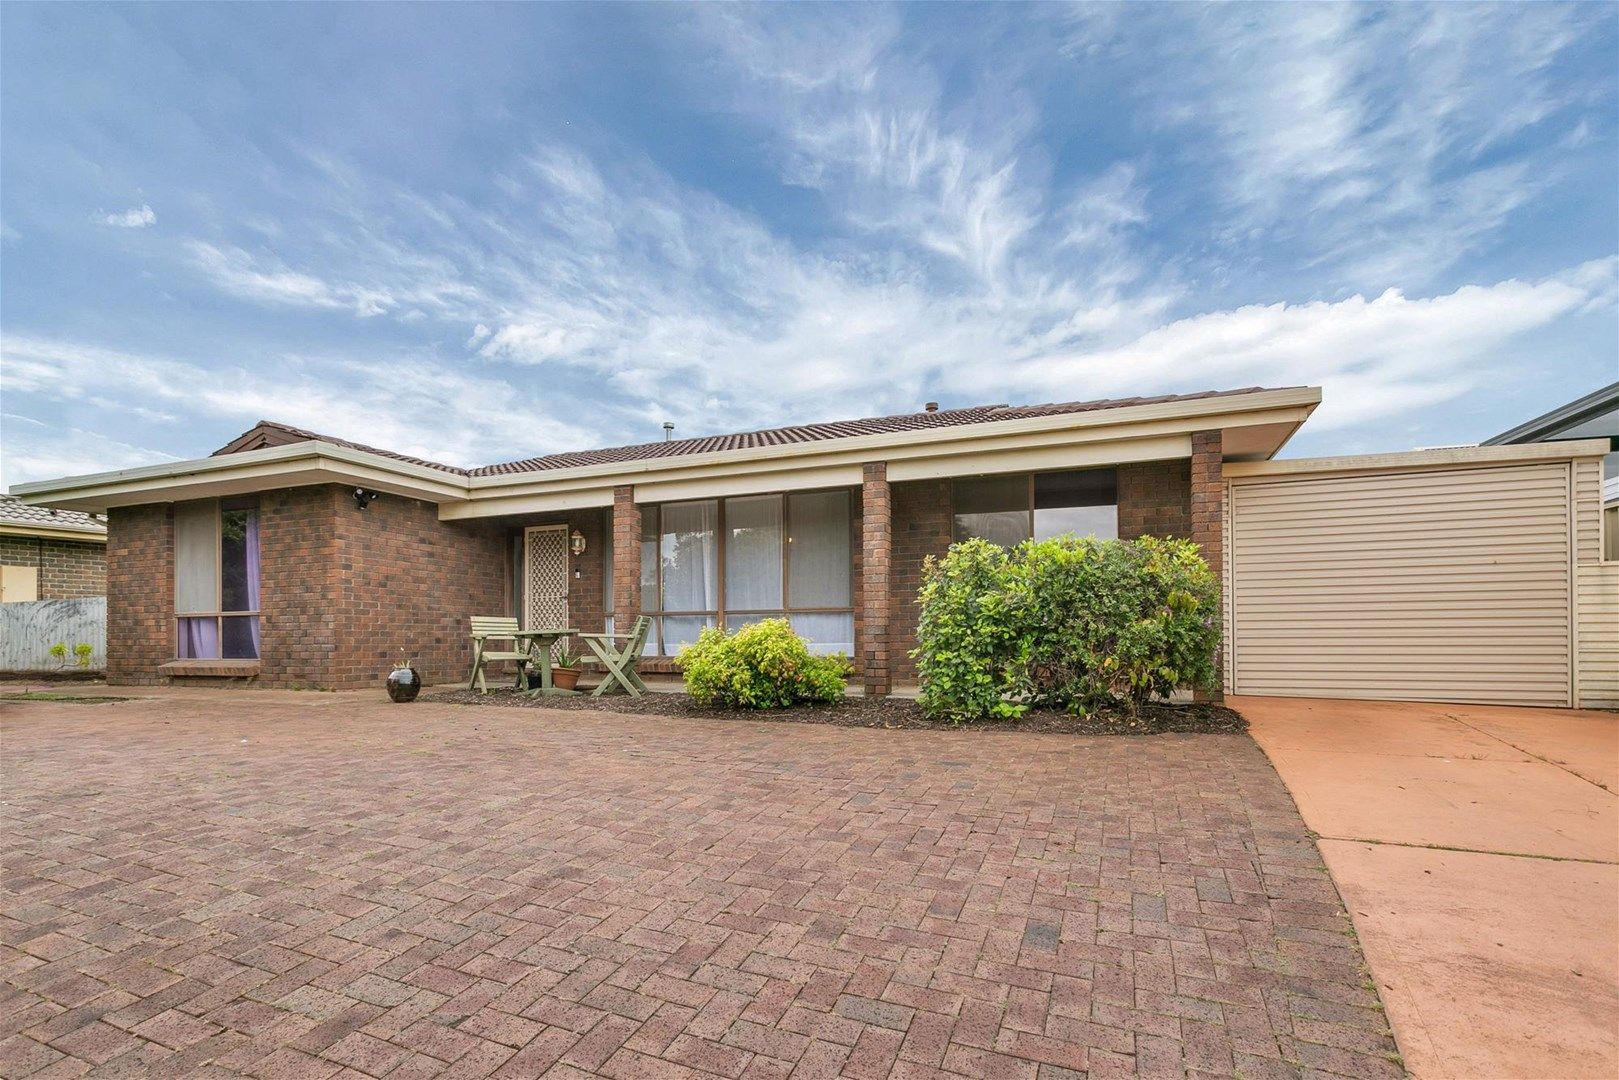 3 bedrooms House in 41 Currawong Crescent MODBURY HEIGHTS SA, 5092